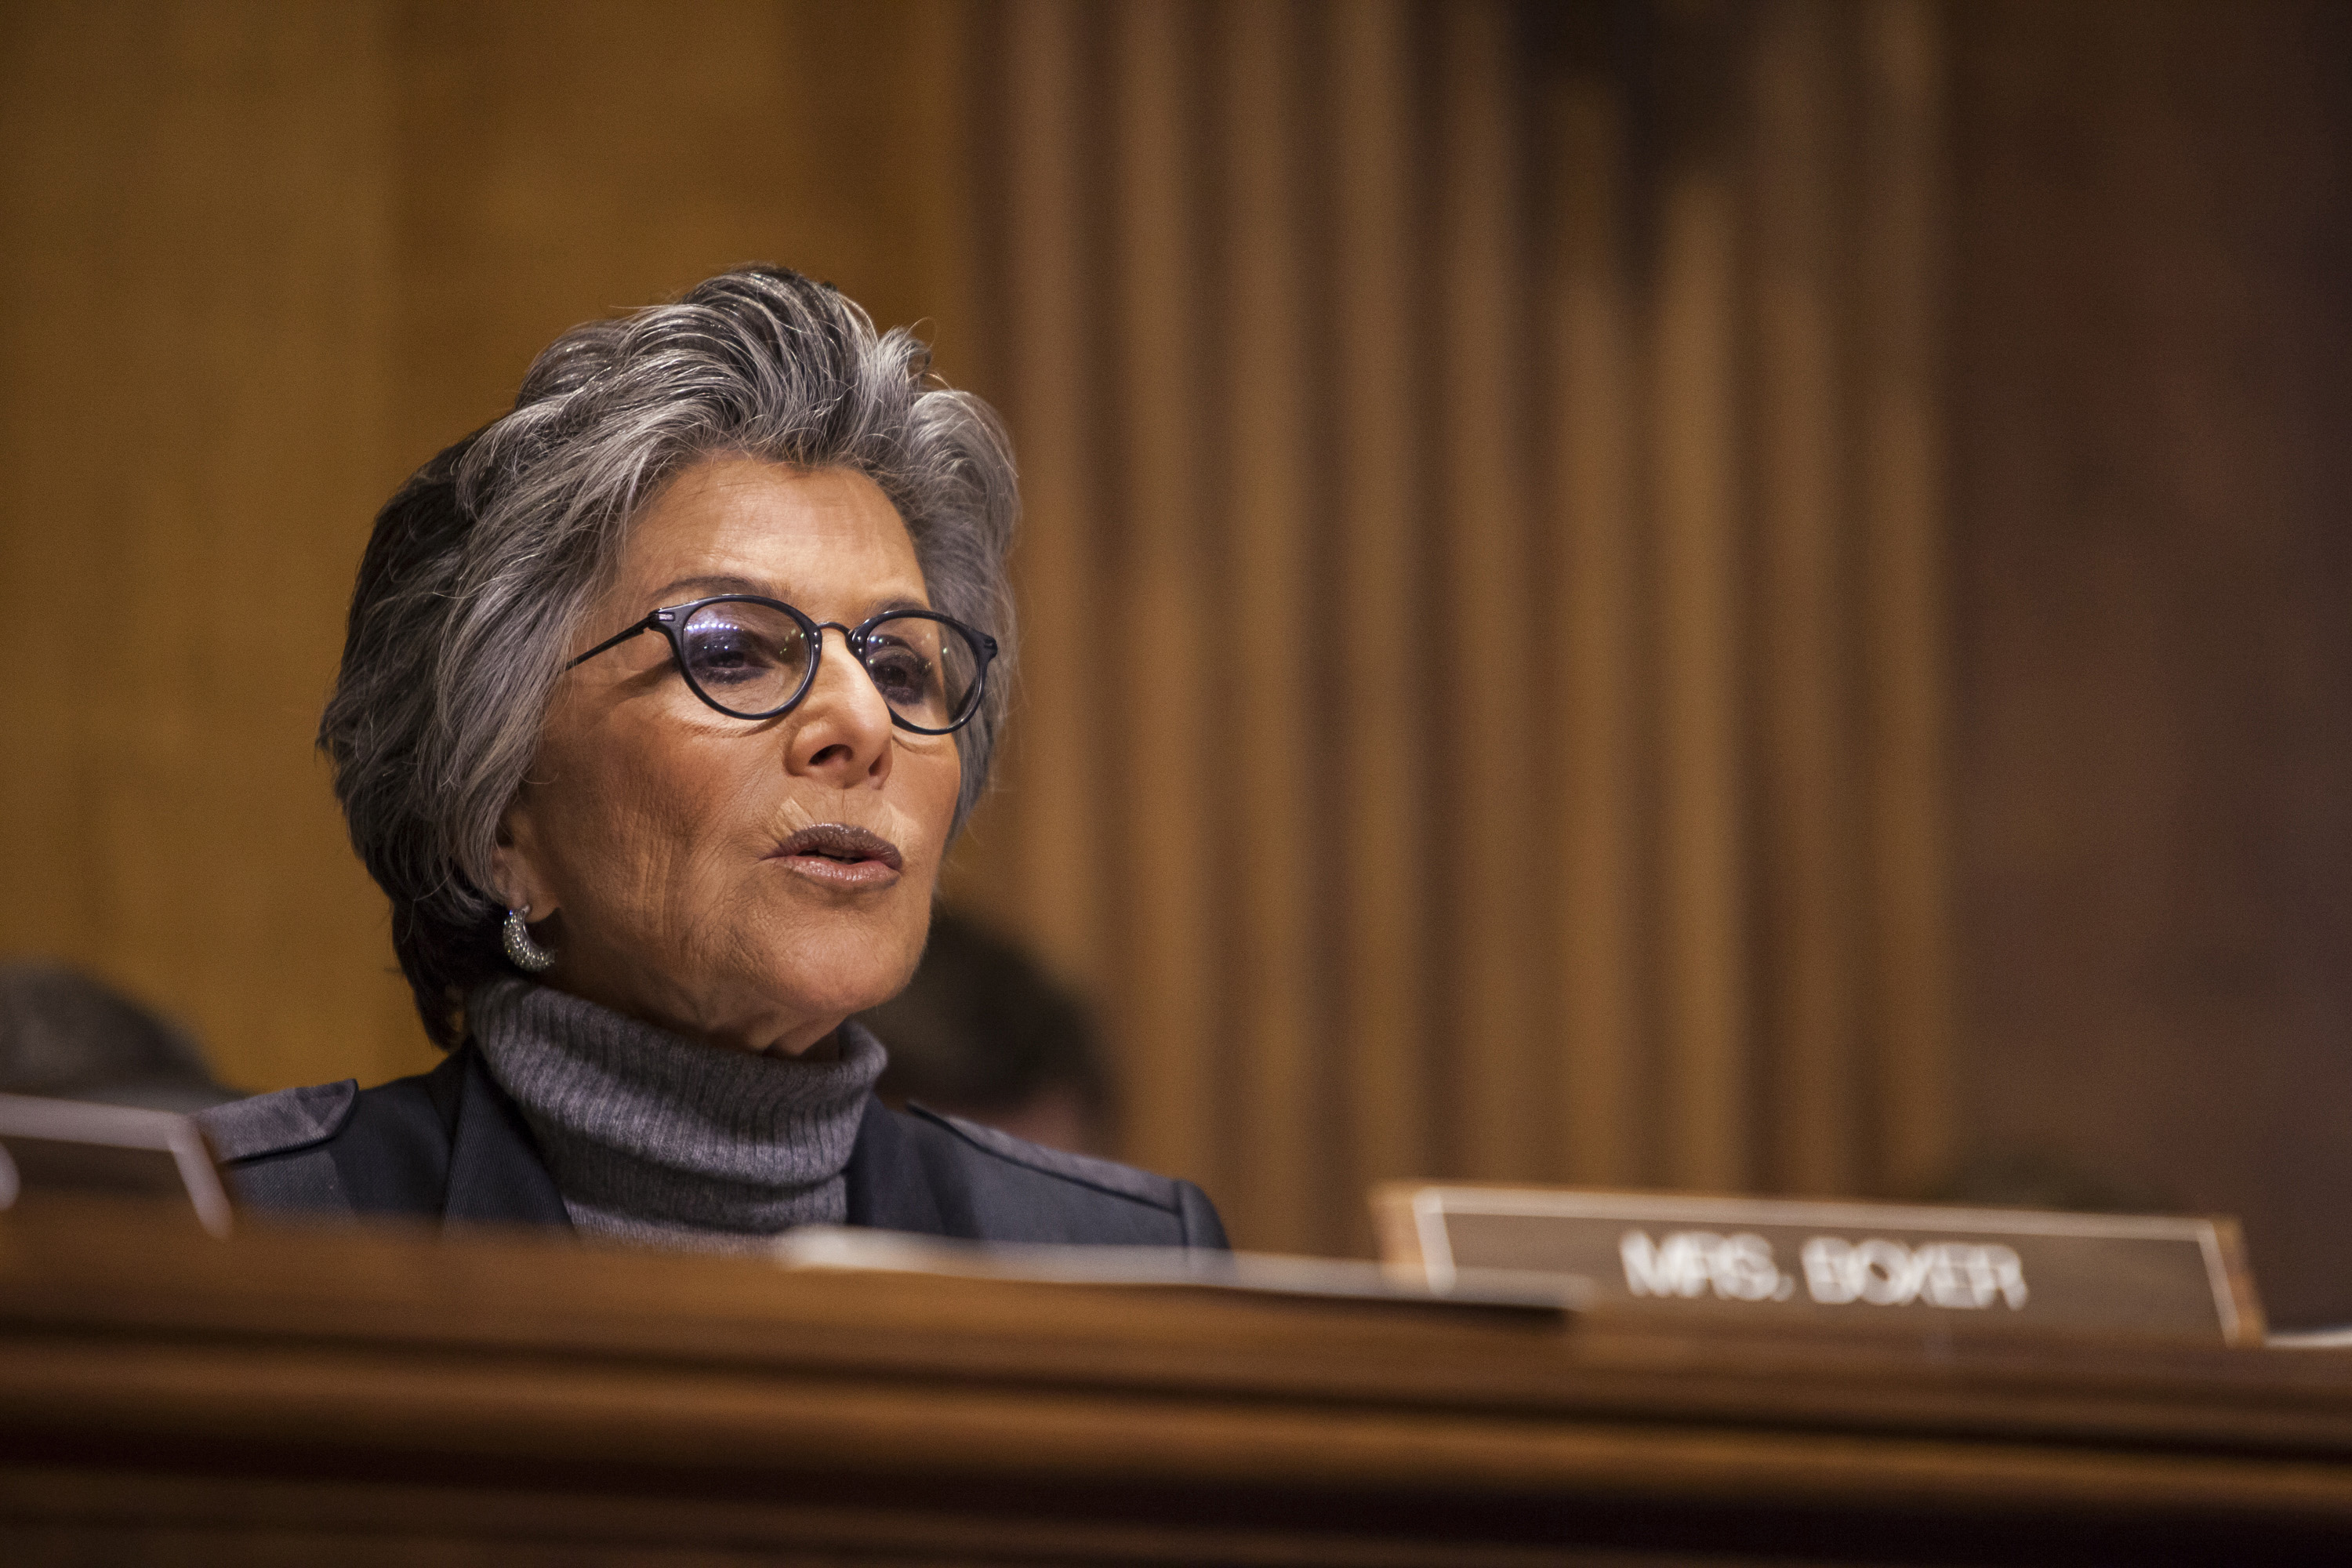 Senator Barbara Boxer speaks during a Senate Foreign Relations committee hearing on U.S. and Cuban relations in Washington on Feb.3, 2015. (Samuel Corum—Anadolu Agency/Getty Images)